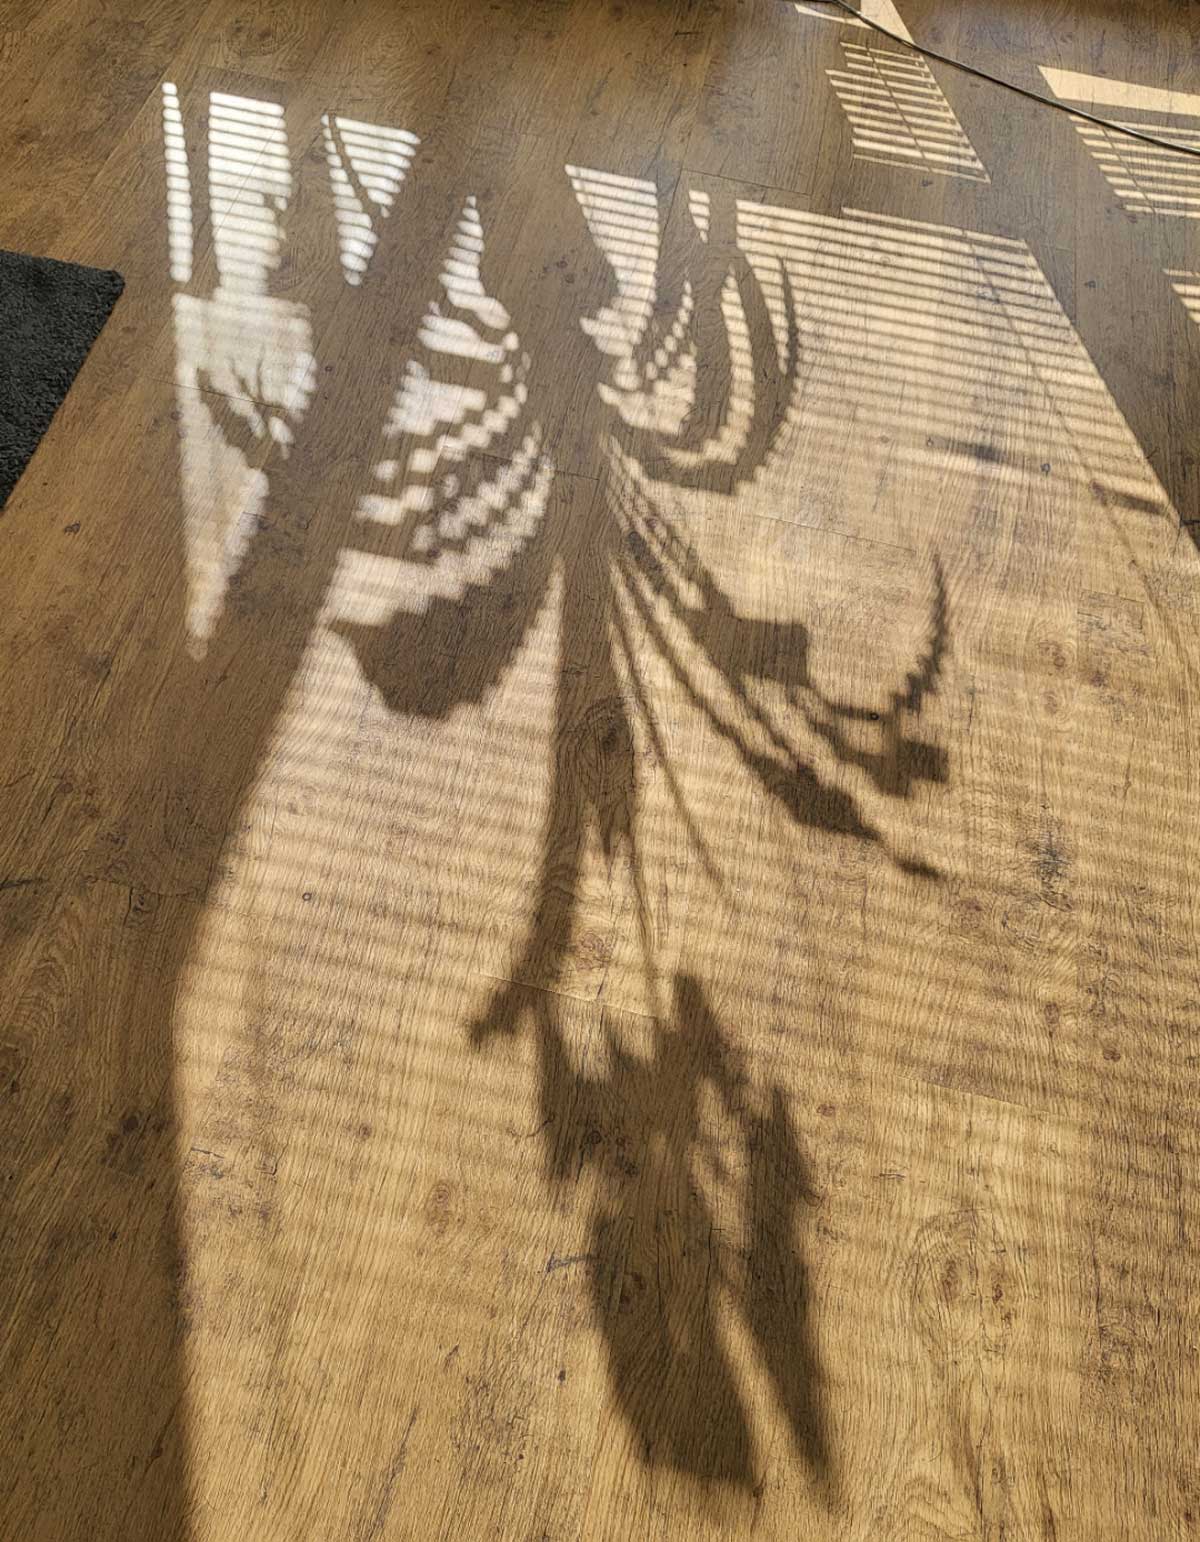 This poorly rendered shadow of a plant in my home